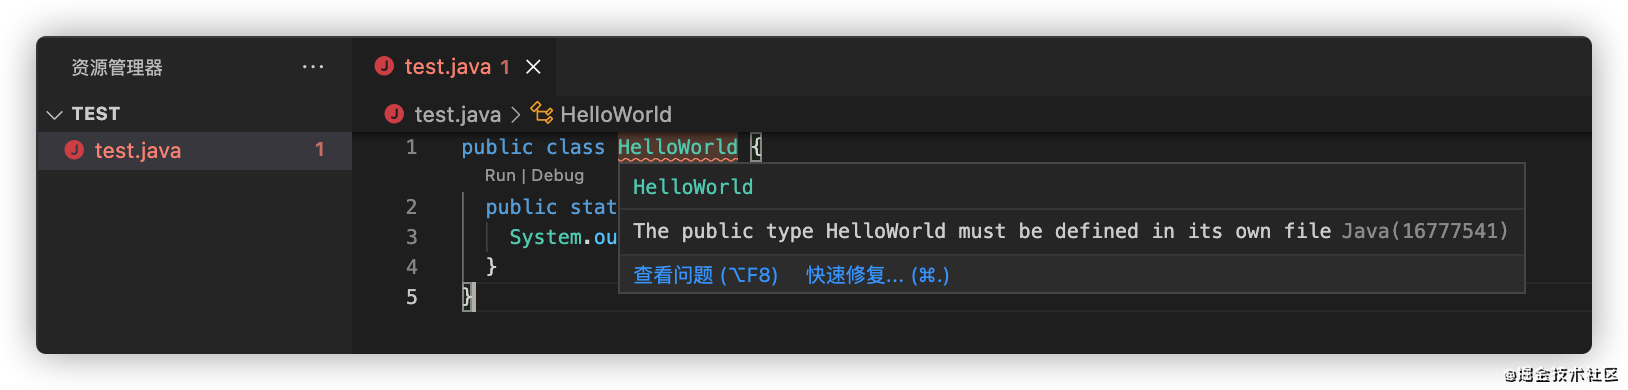 Java Error: The public type HelloWorld must be defined in its own file